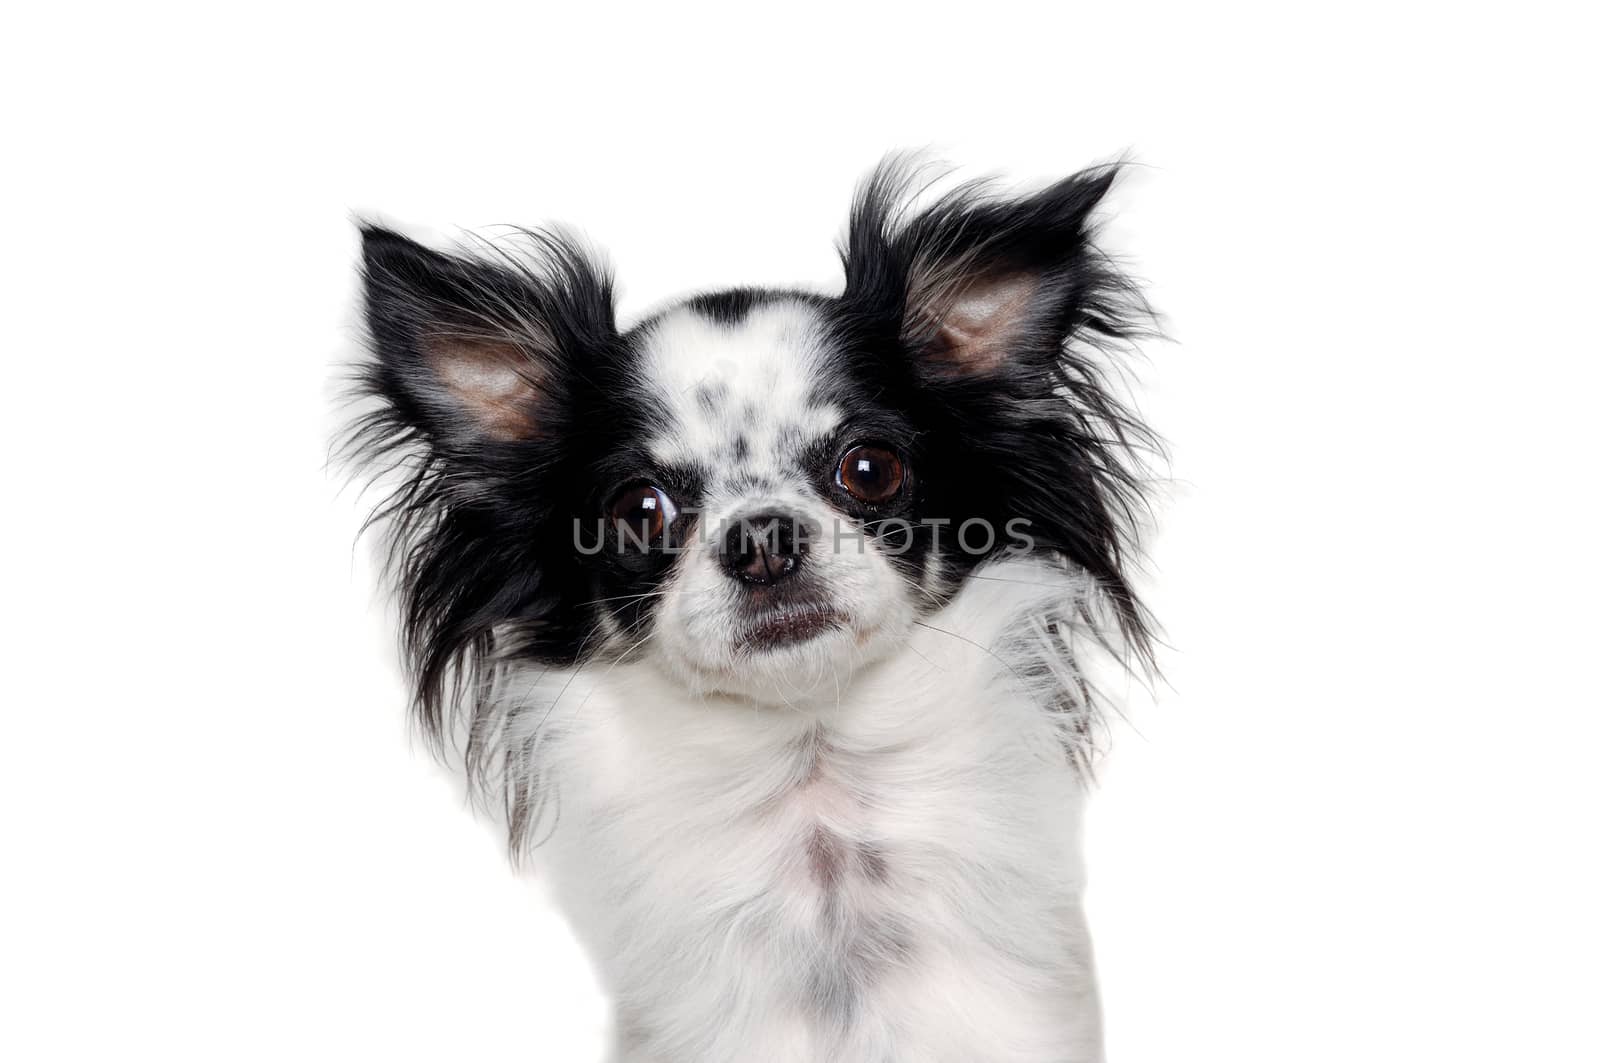 Face of a Chihuahua puppy dog. Isolated on a clean white background.